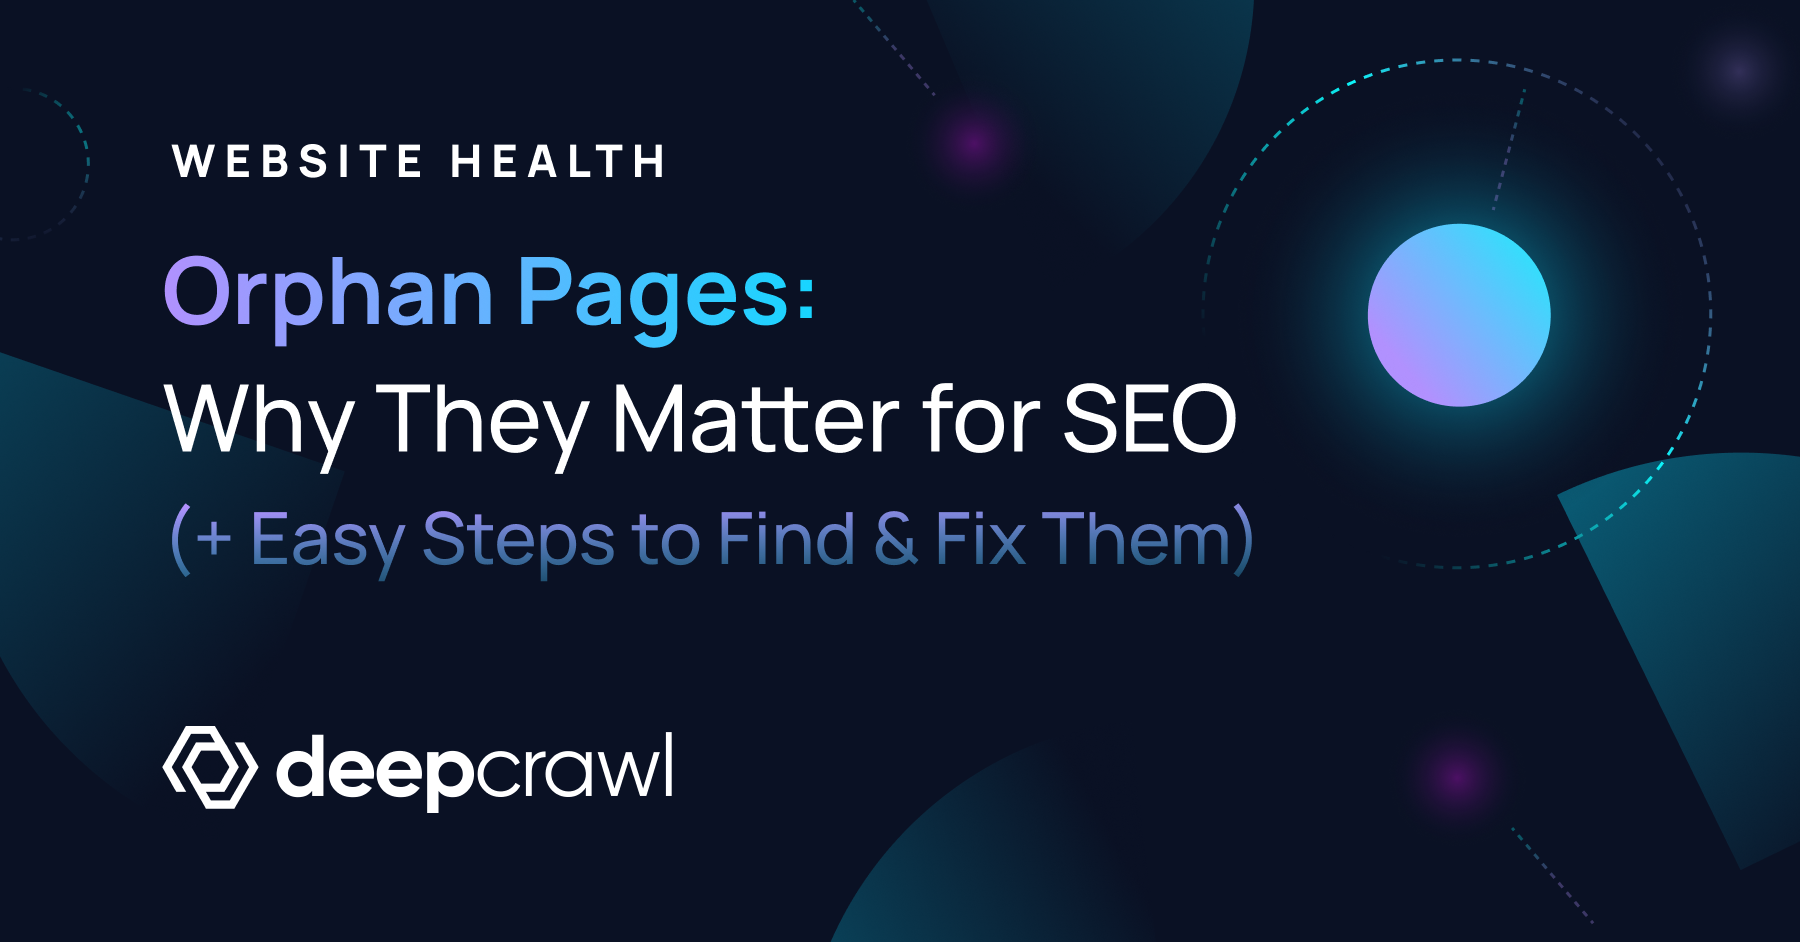 What are orphan pages? How to find and fix orphan pages for SEO.